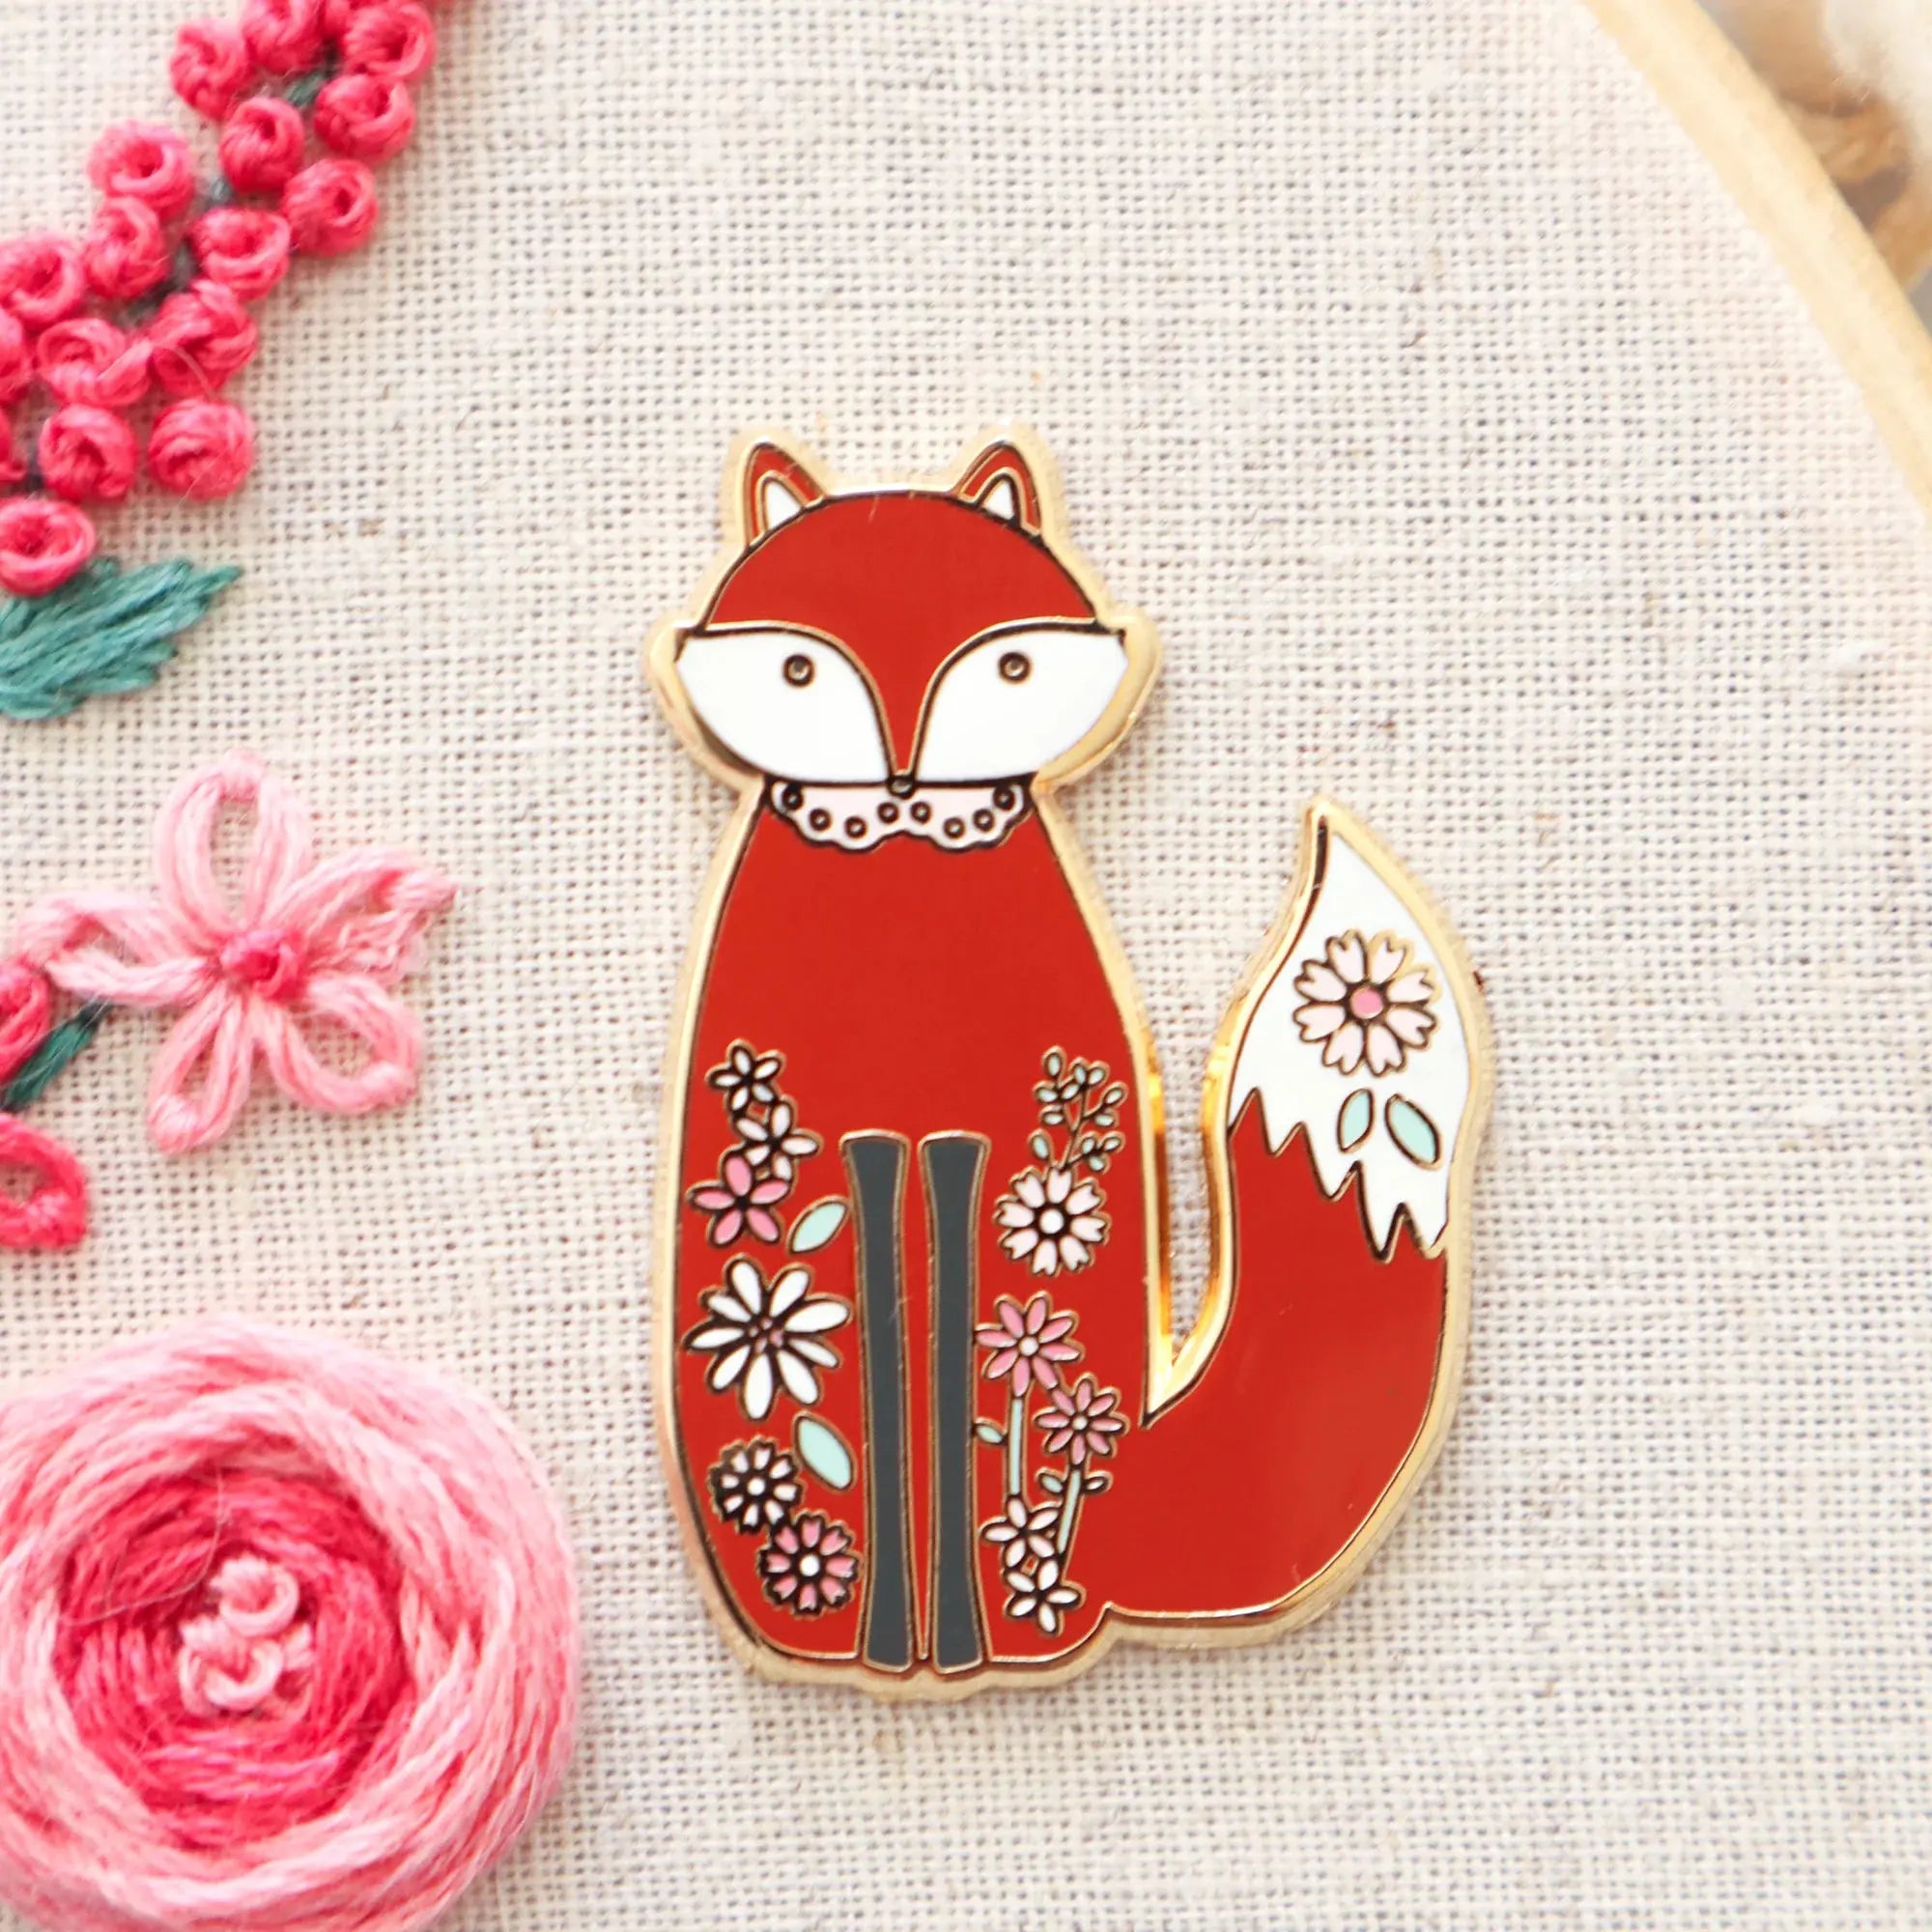 Floral Fox Needle Minder by Flamingo Toes Flamingo Toes